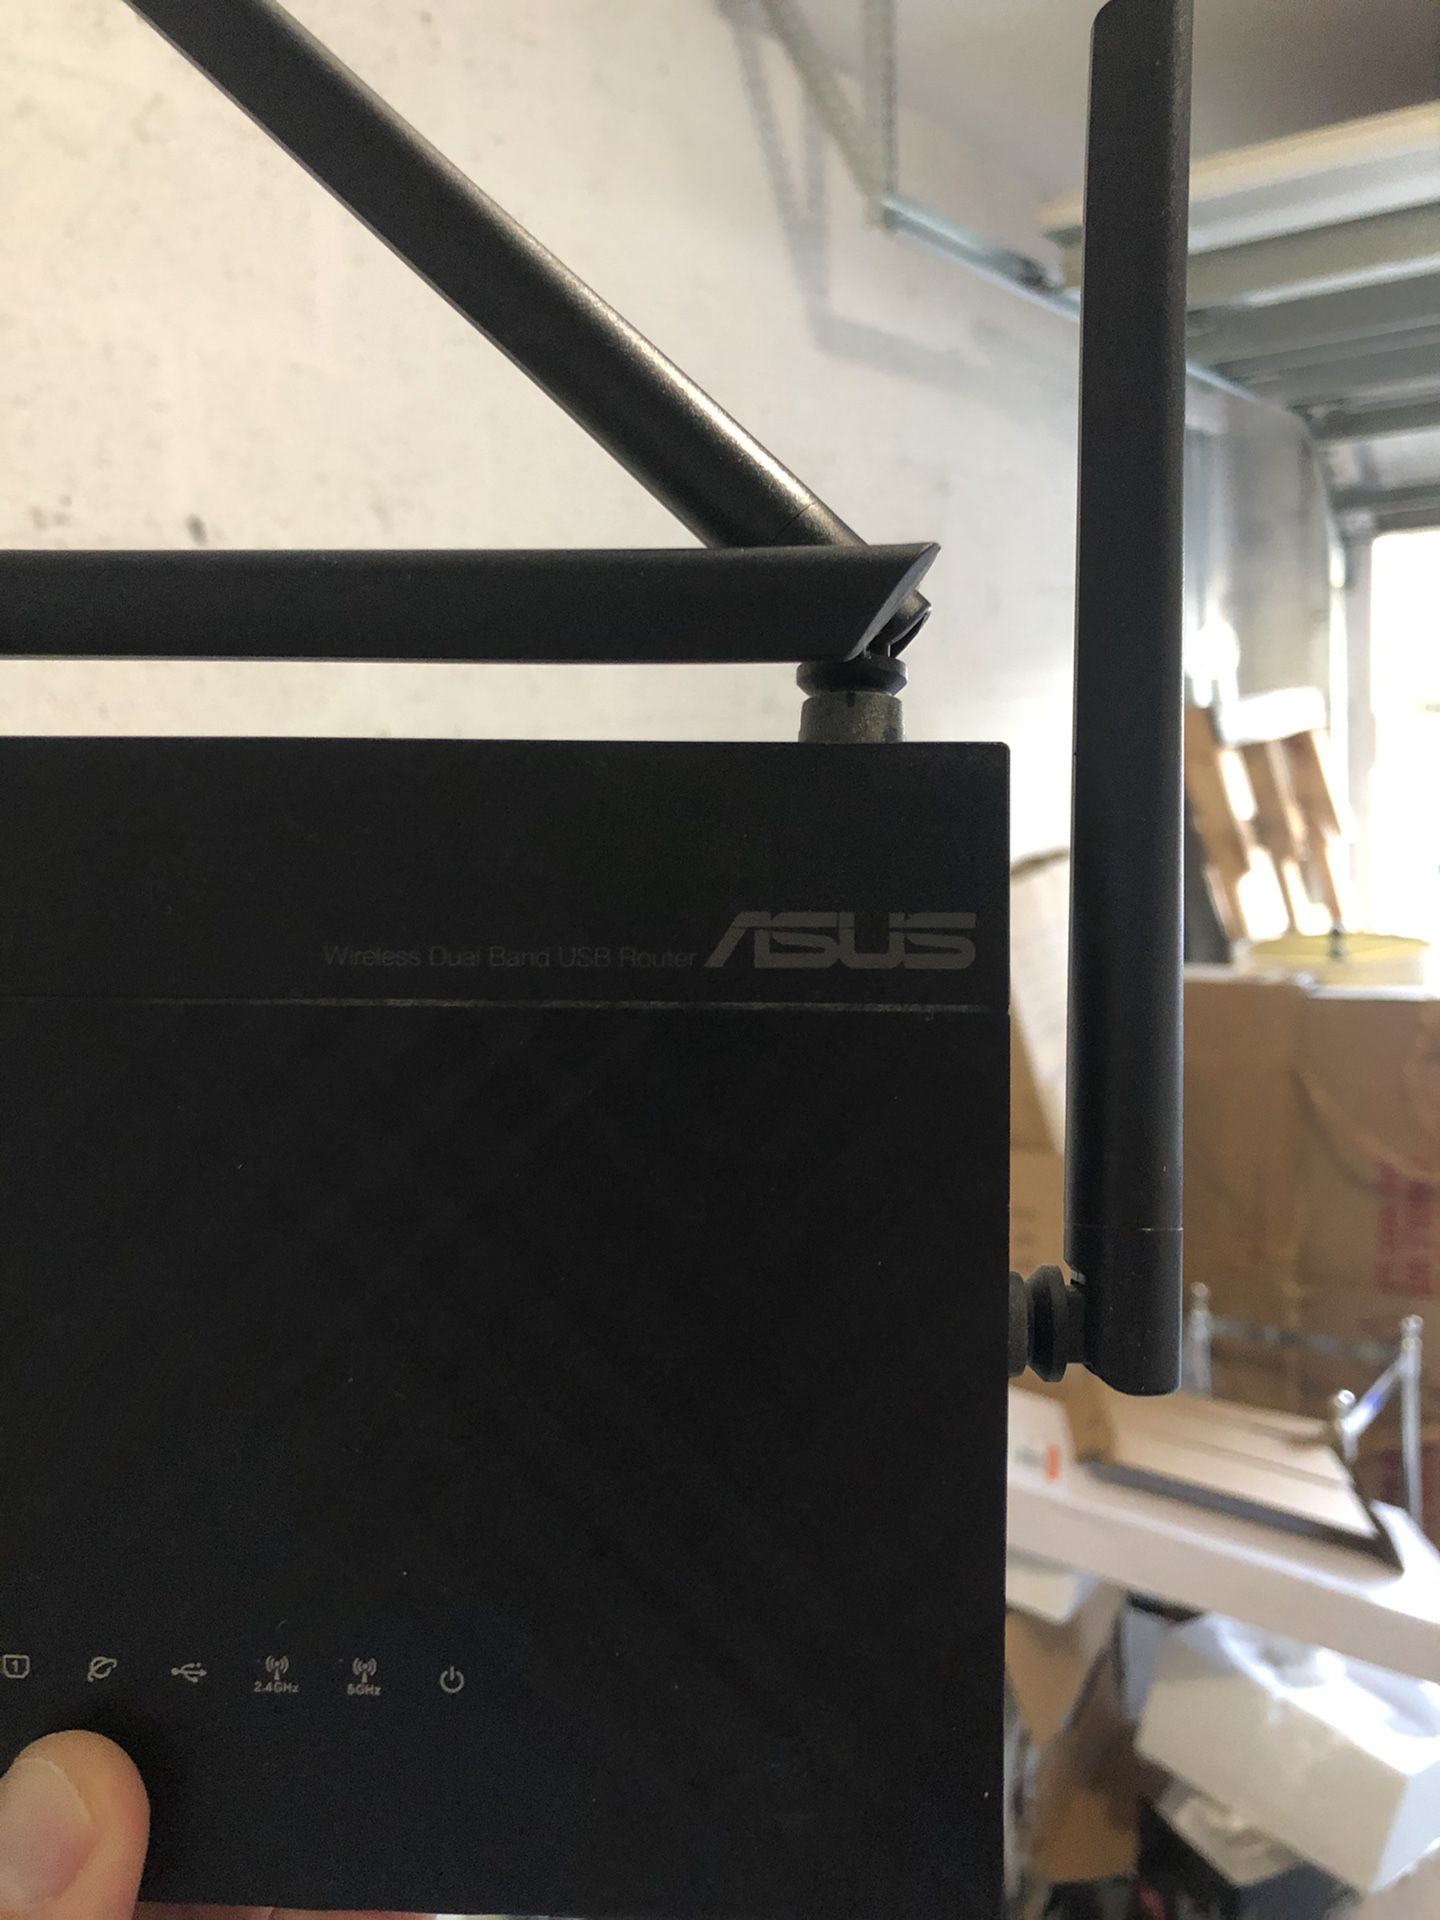 ASUS wireless router